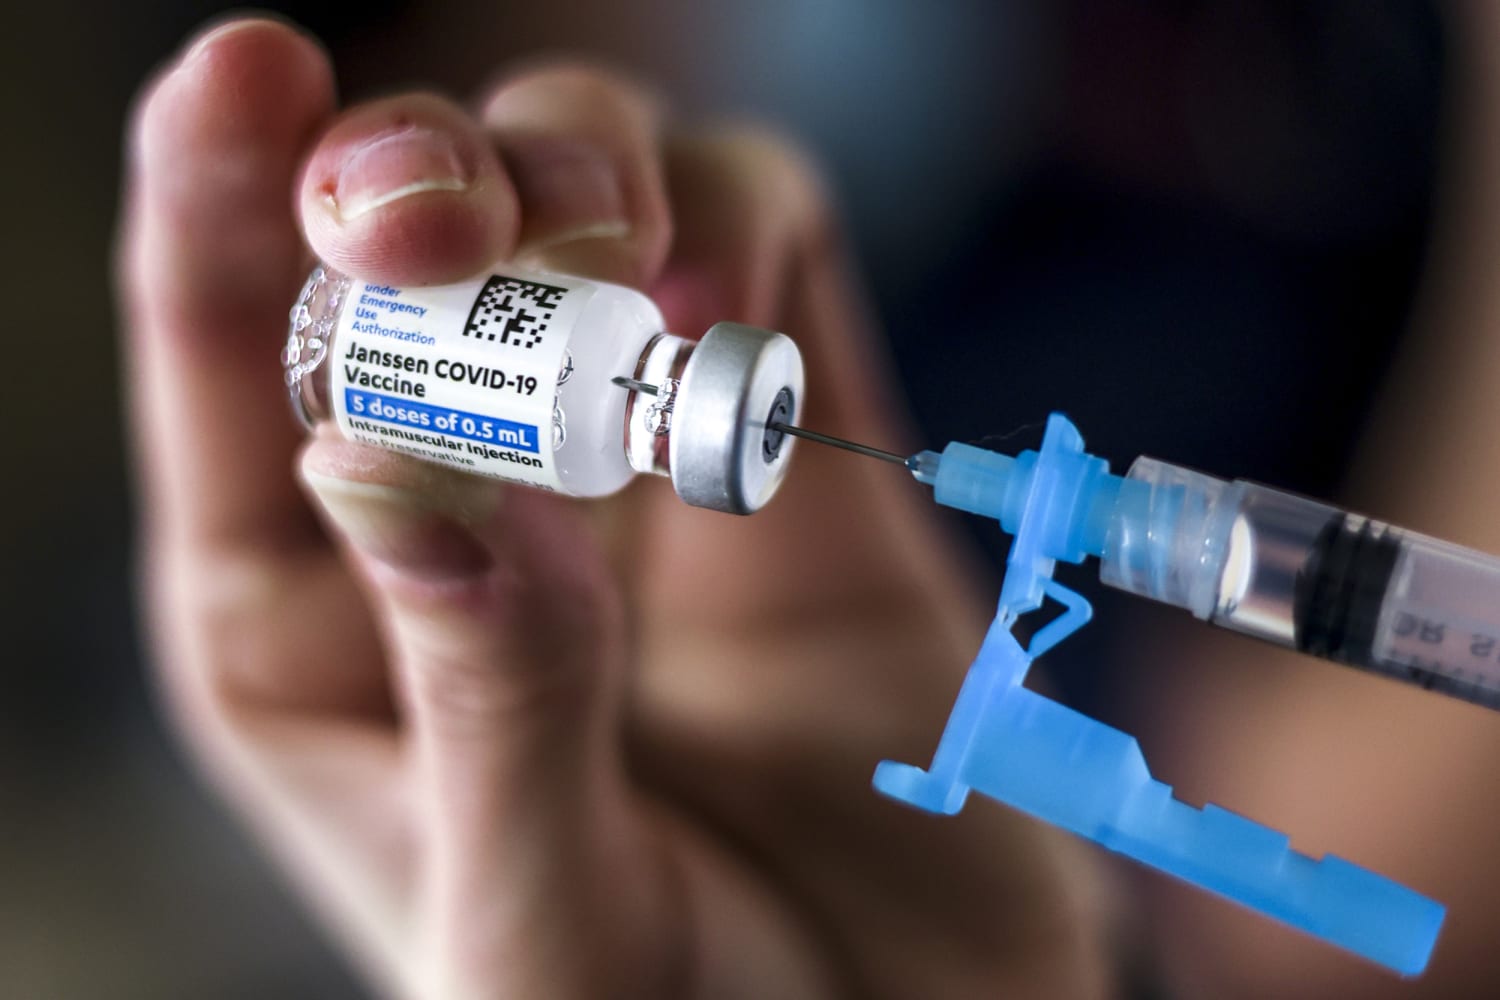 New York teacher arrested after being accused of injecting minor with Covid vaccine